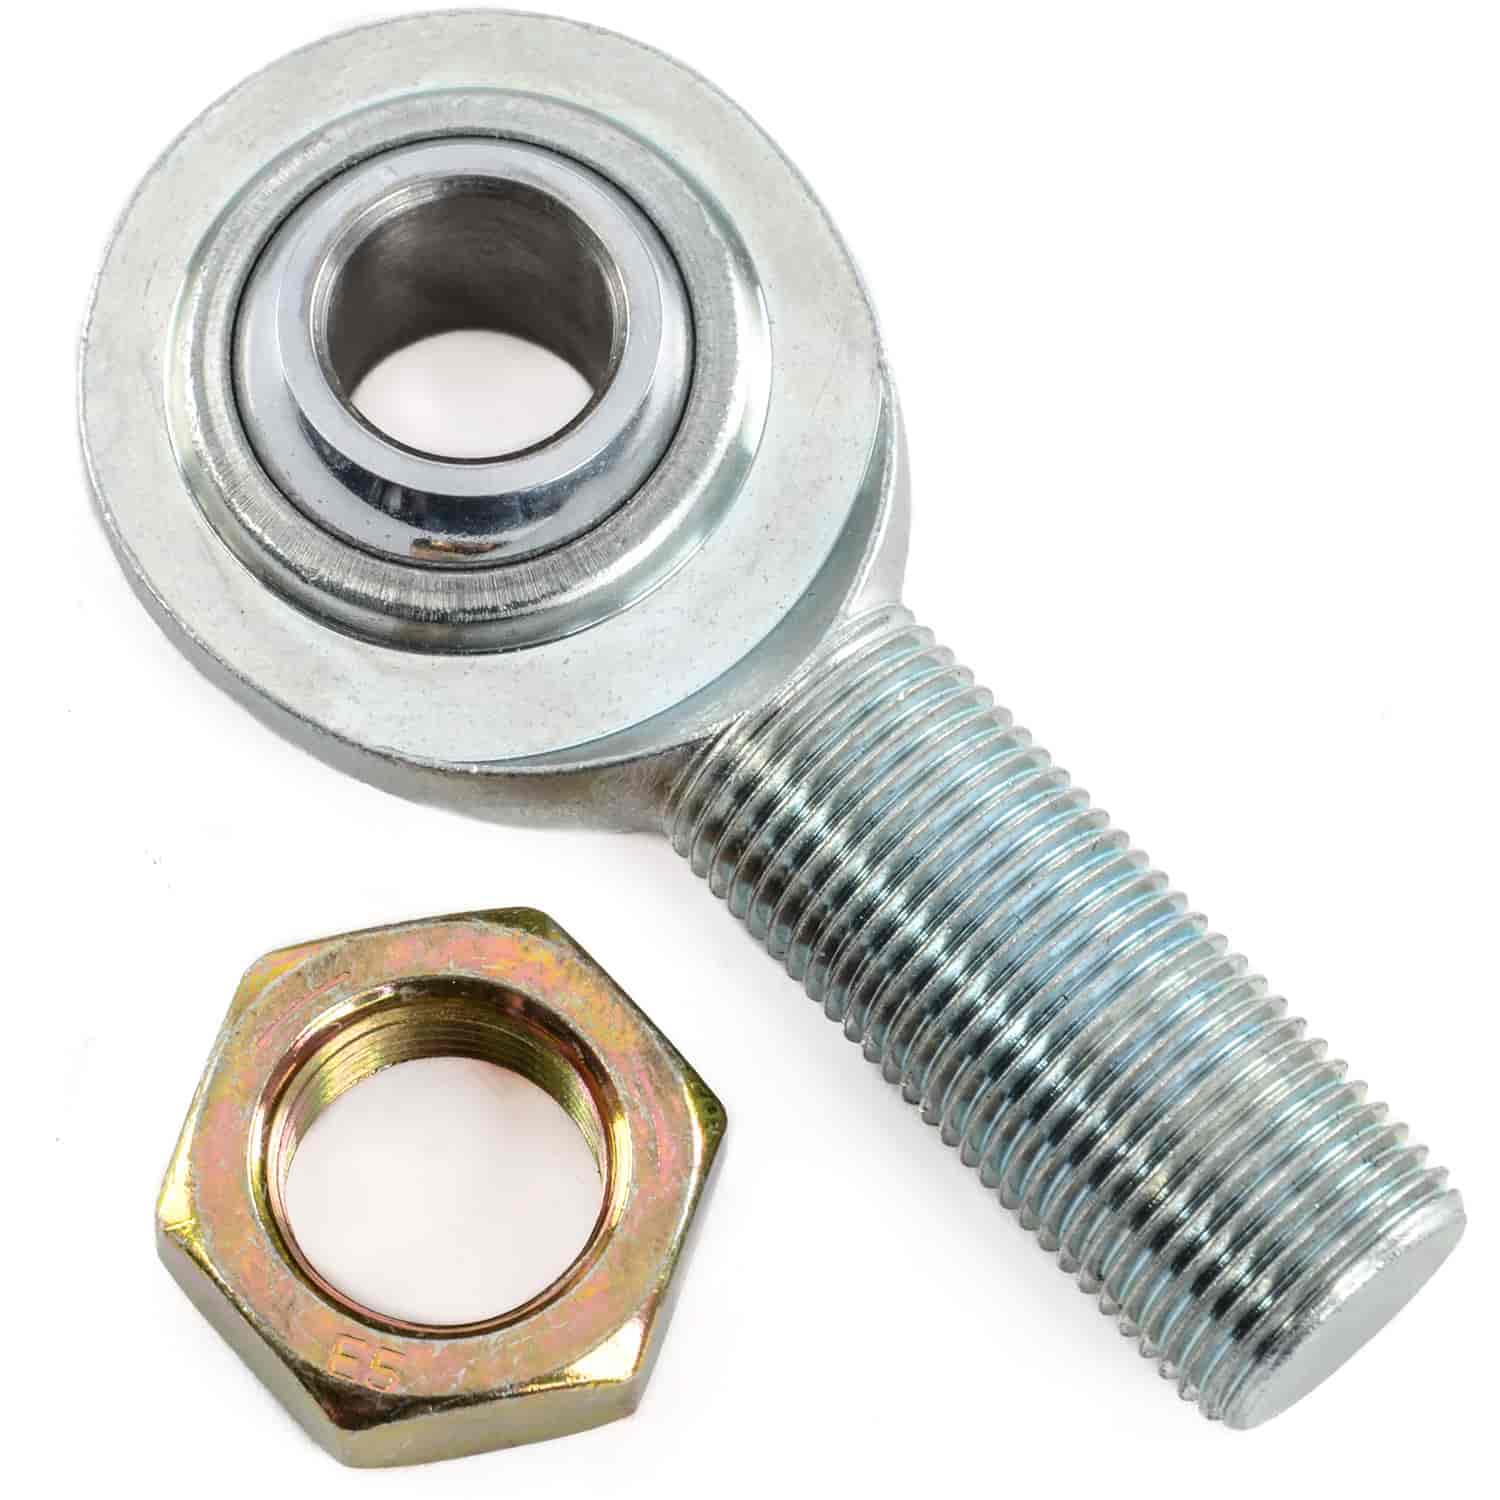 Two-Piece Rod End with Jam Nut 5/8" Hole